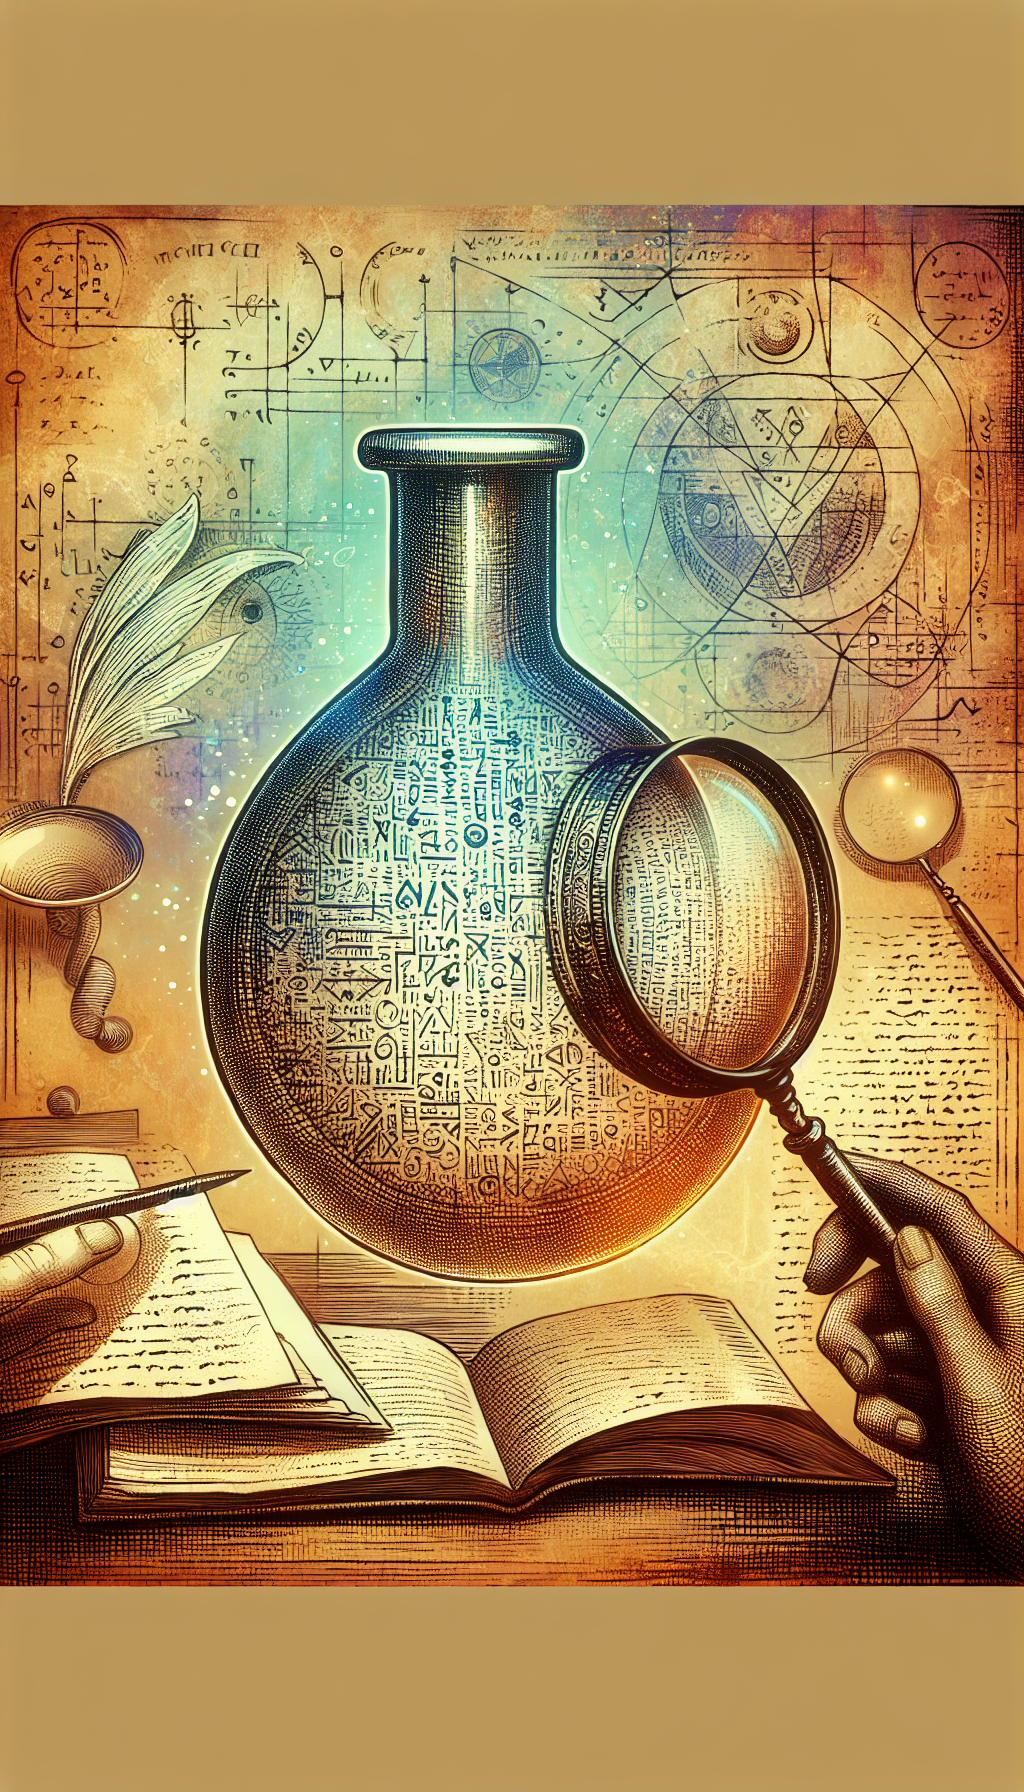 An intricate illustration depicts a magnifying glass hovering over an ancient powder flask, highlighting an array of inscribed marks and obscure symbols. A ghostly parchment unfurls in the background, with sketched translations and notes. The flask appears etched with fine detail, set against a backdrop that suggests a historian's desk, strewn with old tomes and artifact-dating tools.